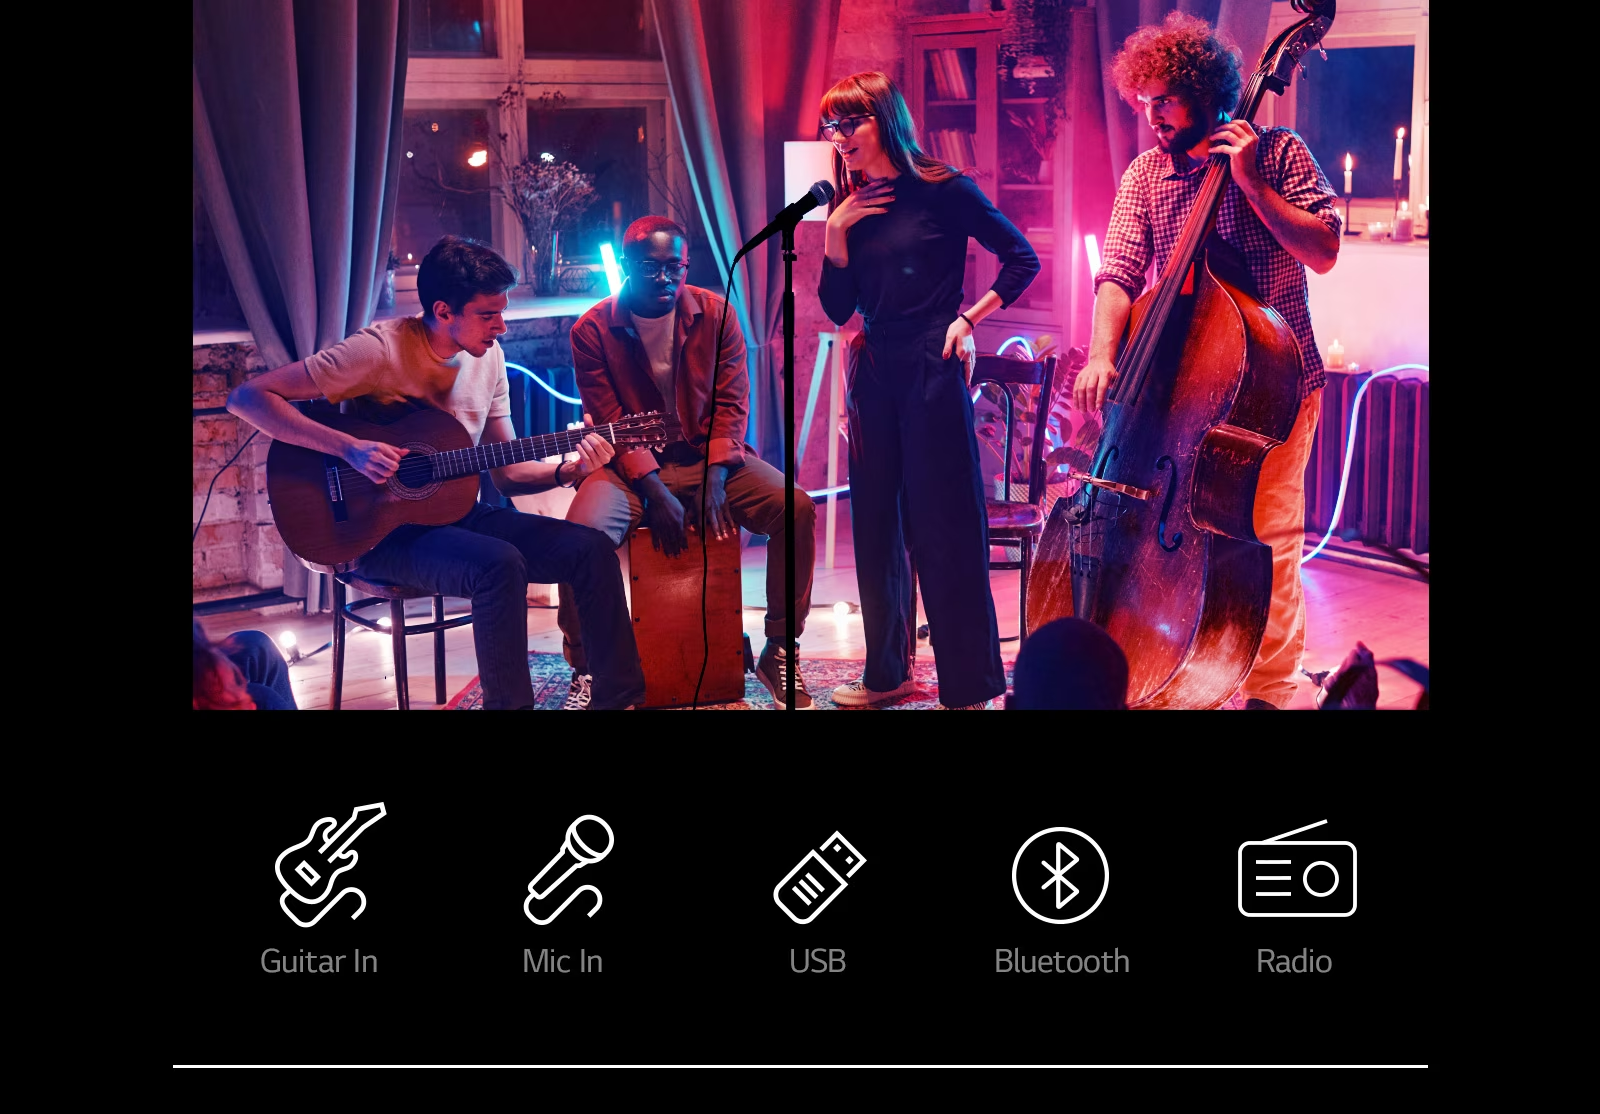 LG RNC7 A concert scene. Connectivity icons are shown below the image.